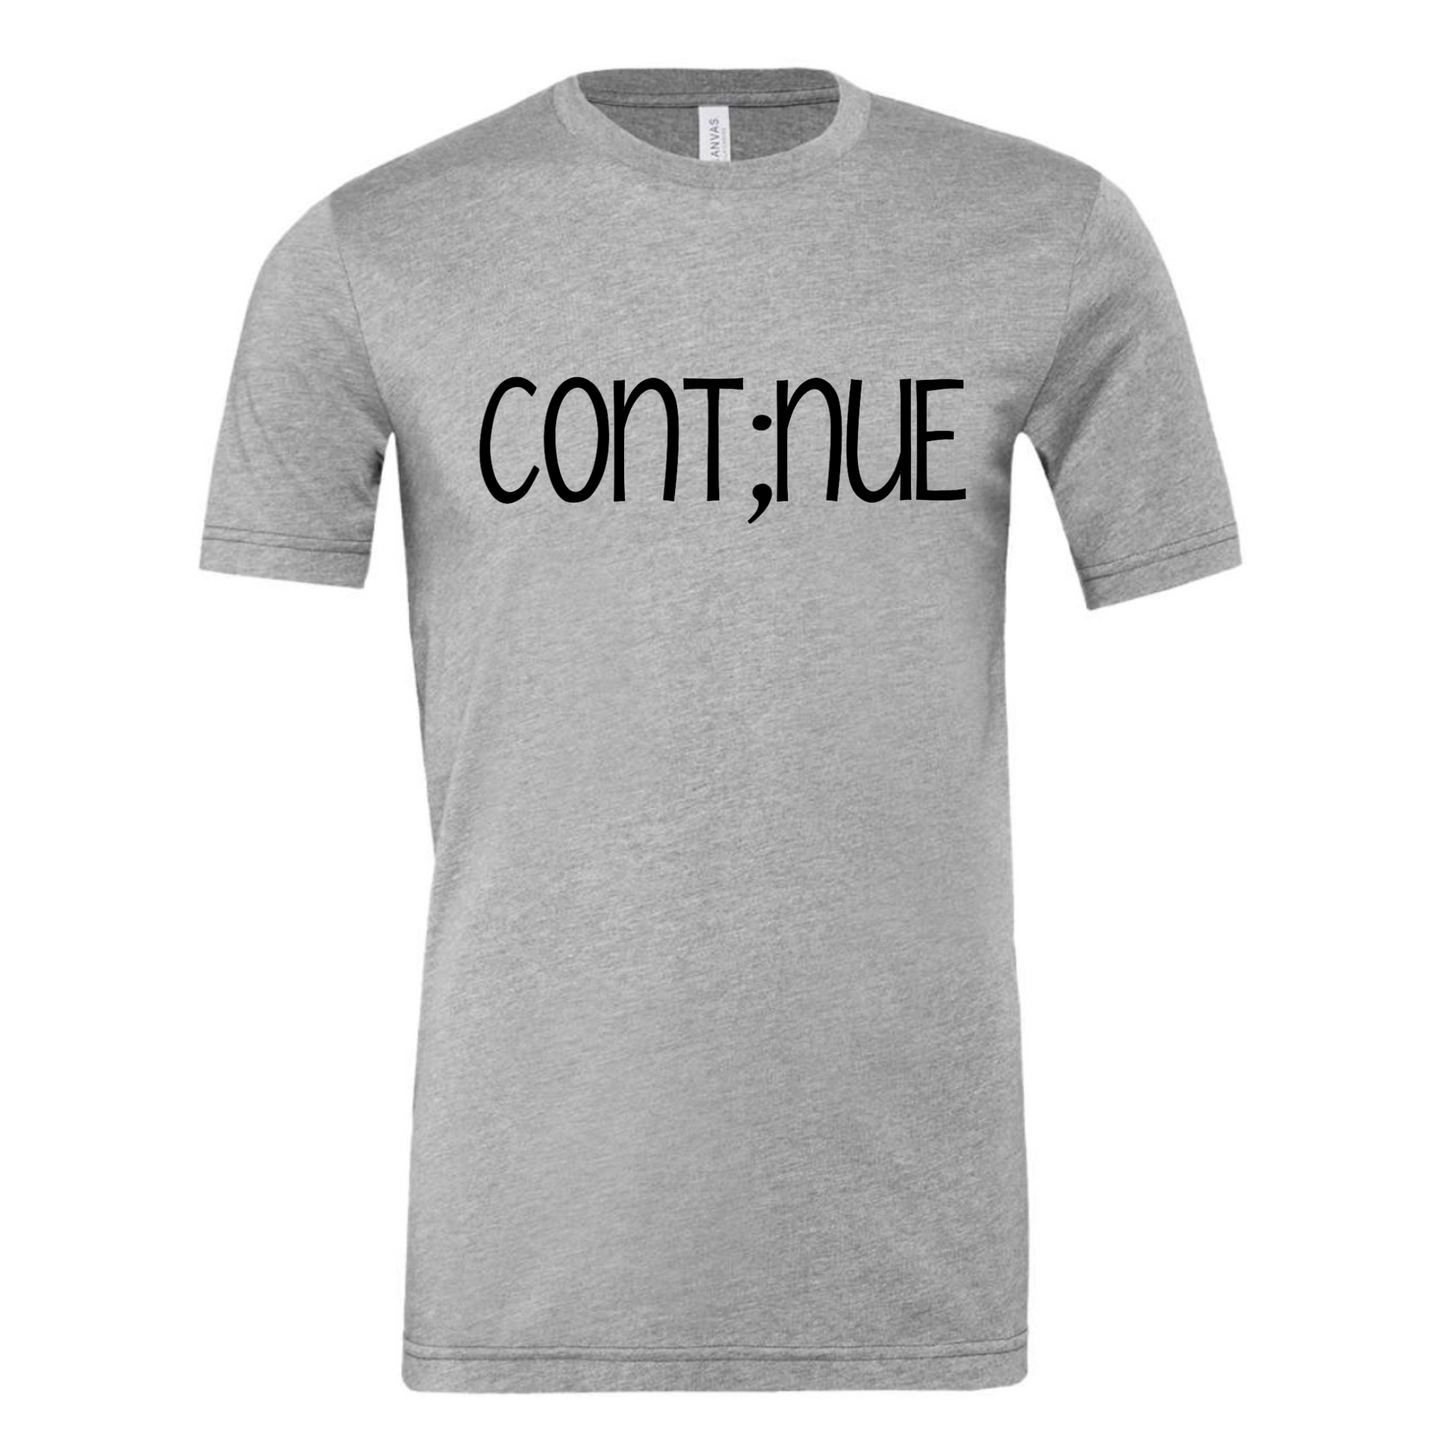 Cont;nue - meaning "my story isn't over". You're the author of your story. Don't end it with a period when you feel stuck. Pause, take it in and continue on. Shirt is in a light gray with black writing. This is the front view of the shirt.